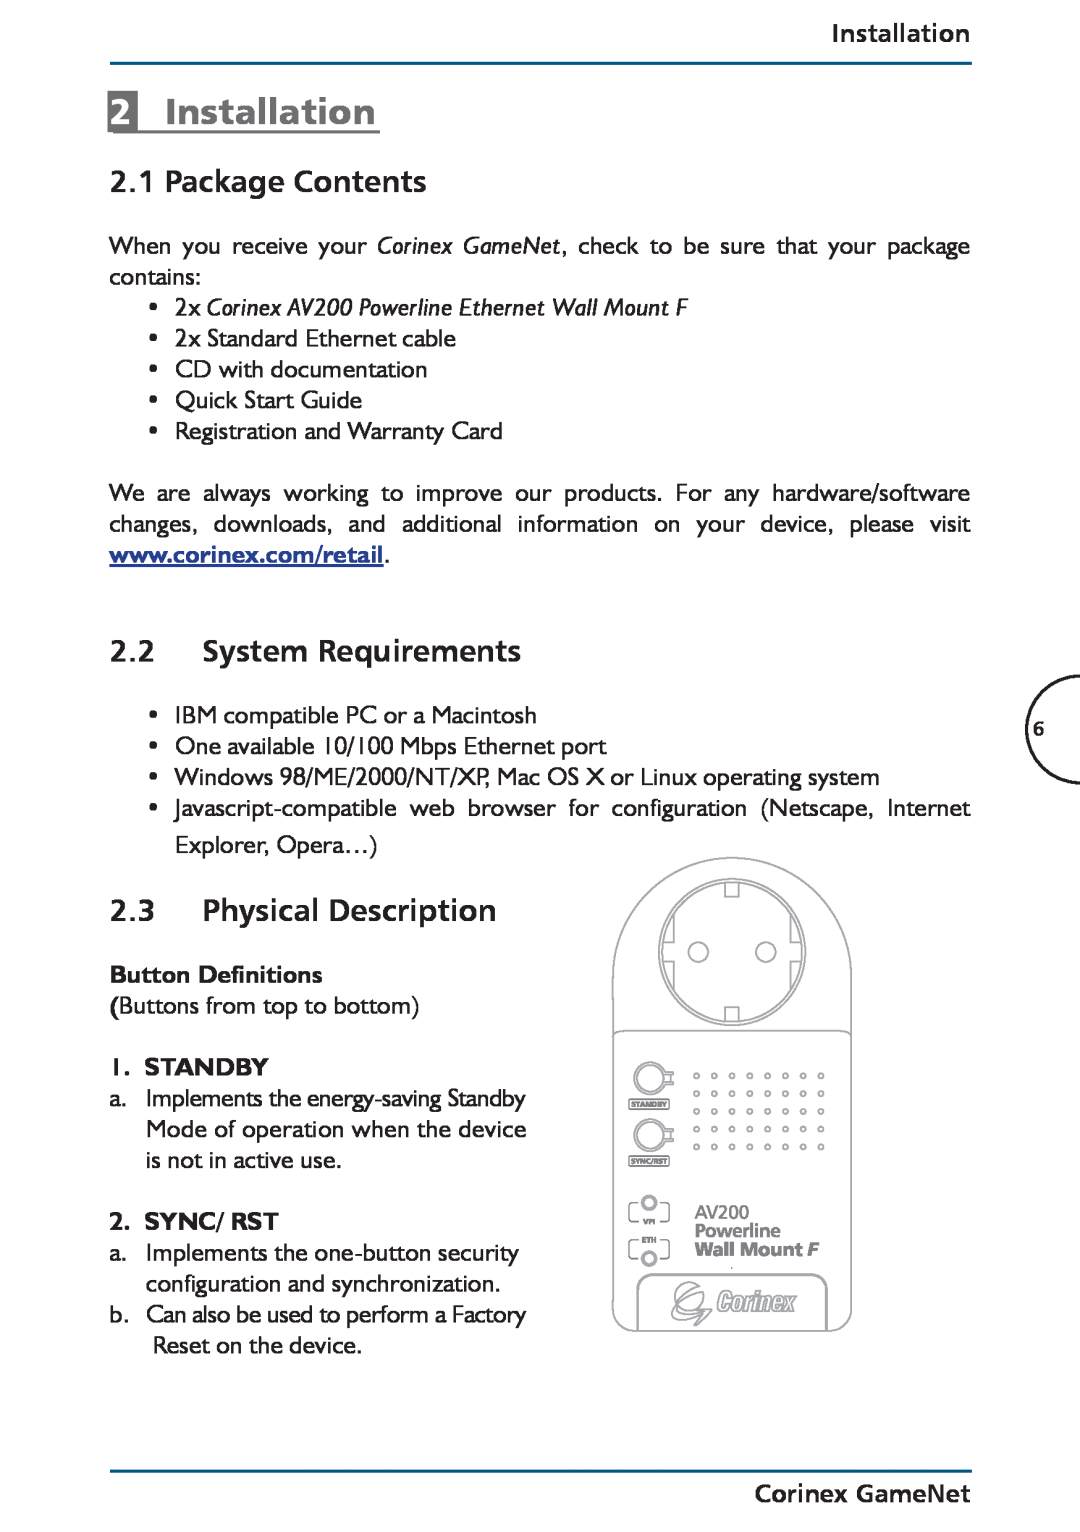 Corinex Global GameNet manual Installation, Package Contents, System Requirements, Physical Description, Button Definitions 